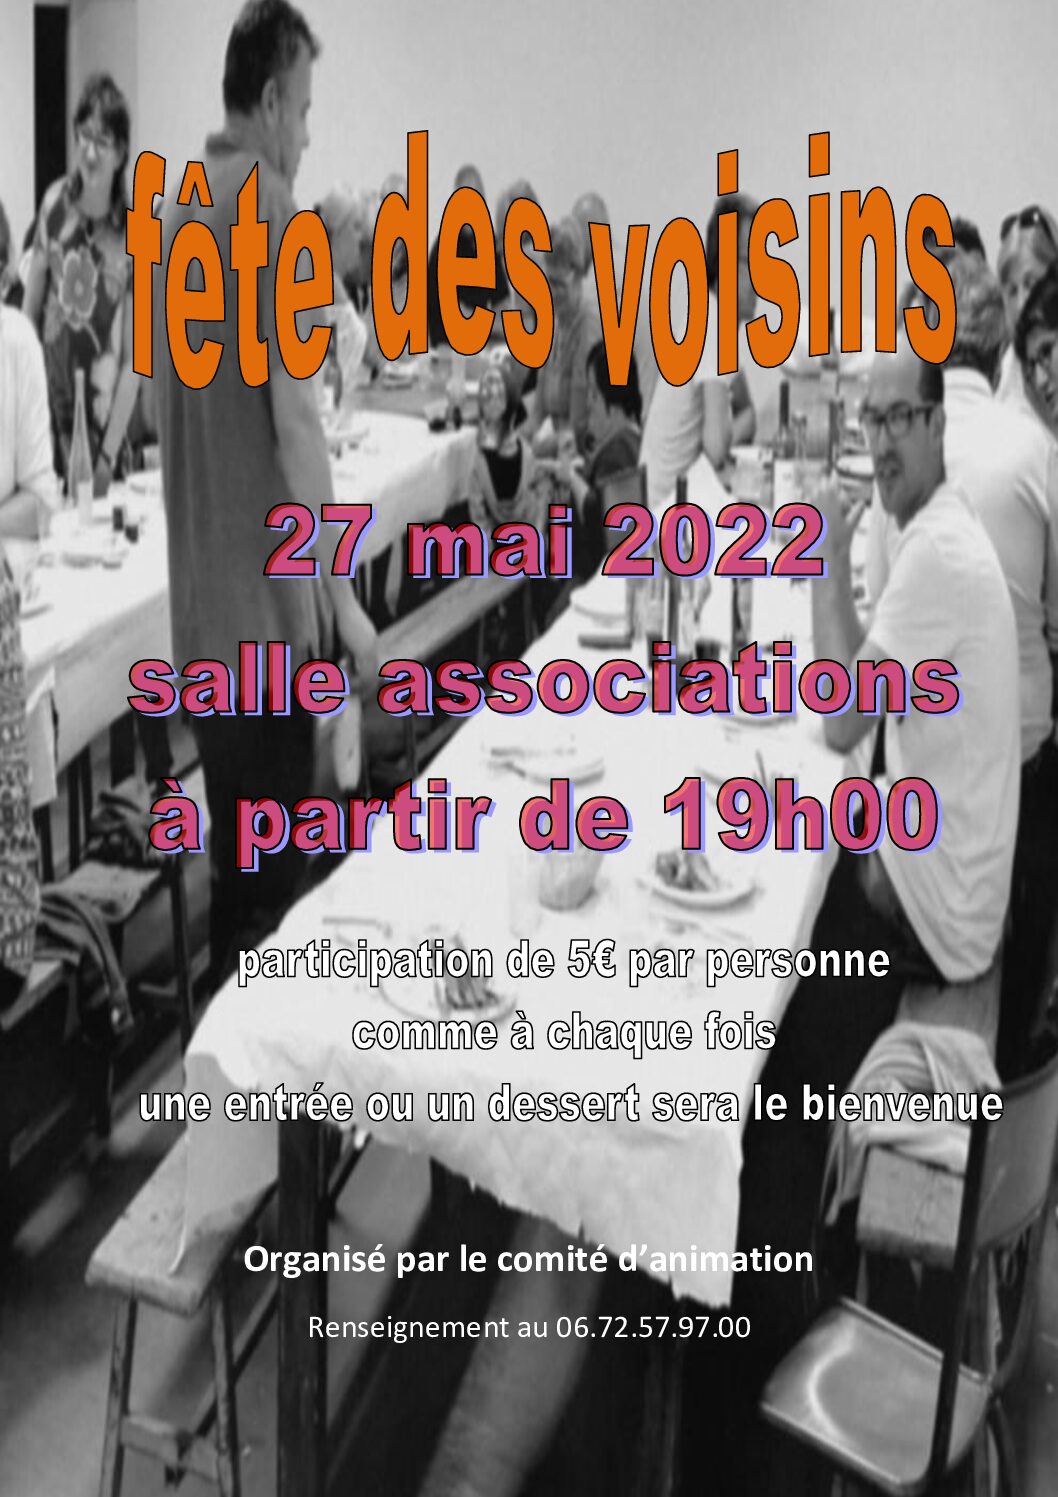 You are currently viewing Fête des voisins